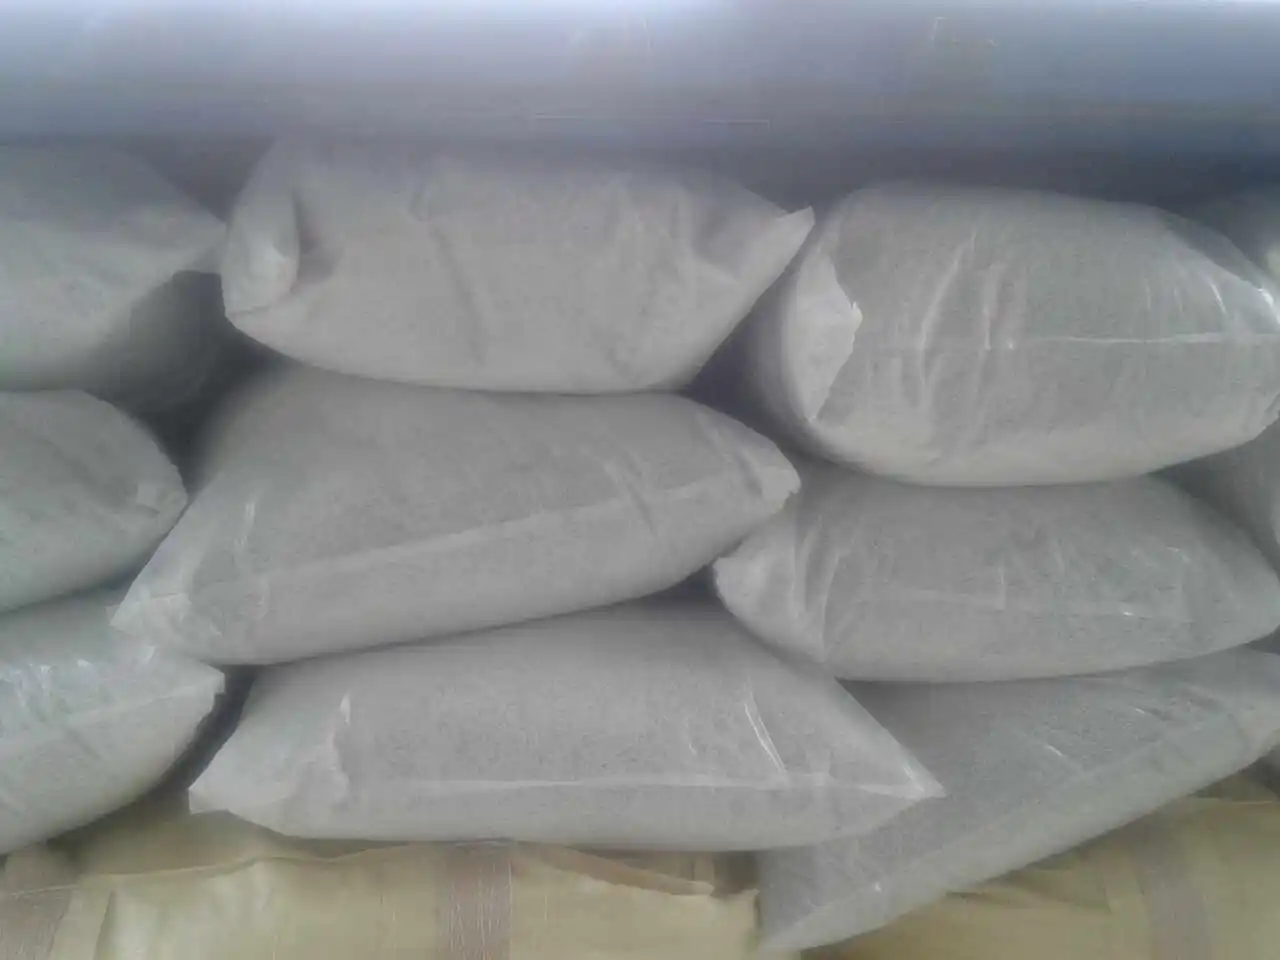 High quality expanded construction perlite for free sample